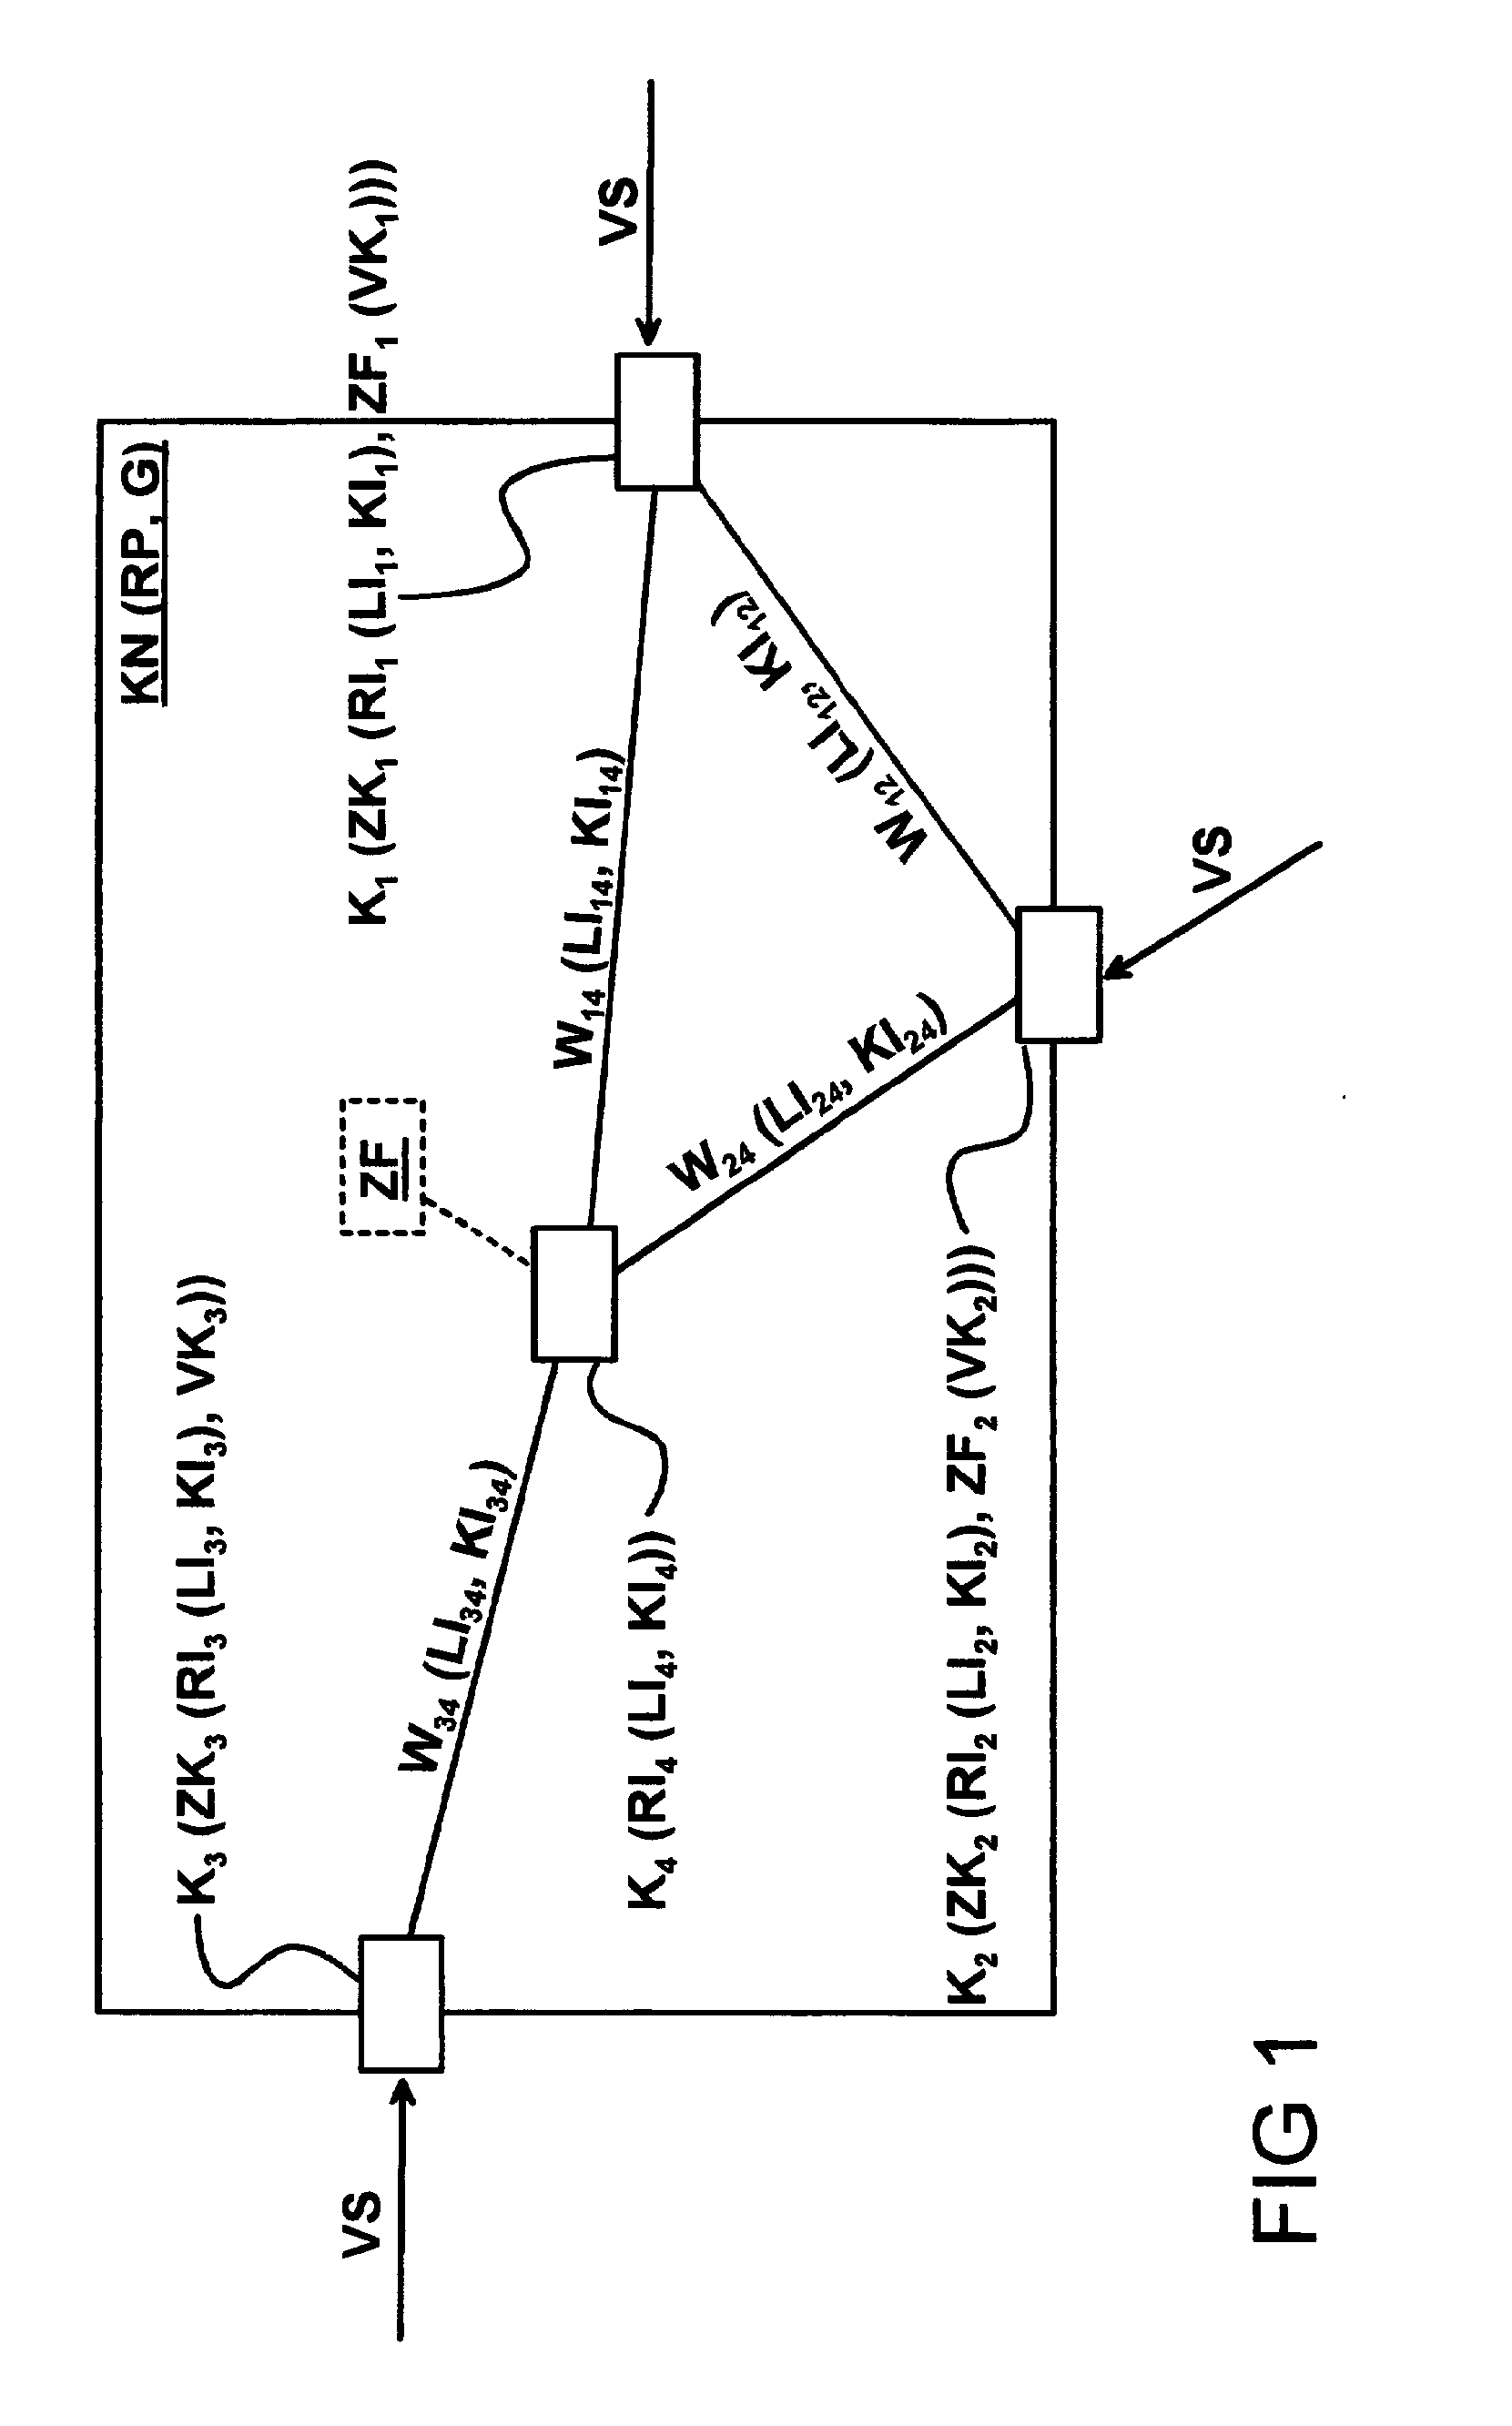 Method and Device for Controlling Access to a Communications Network